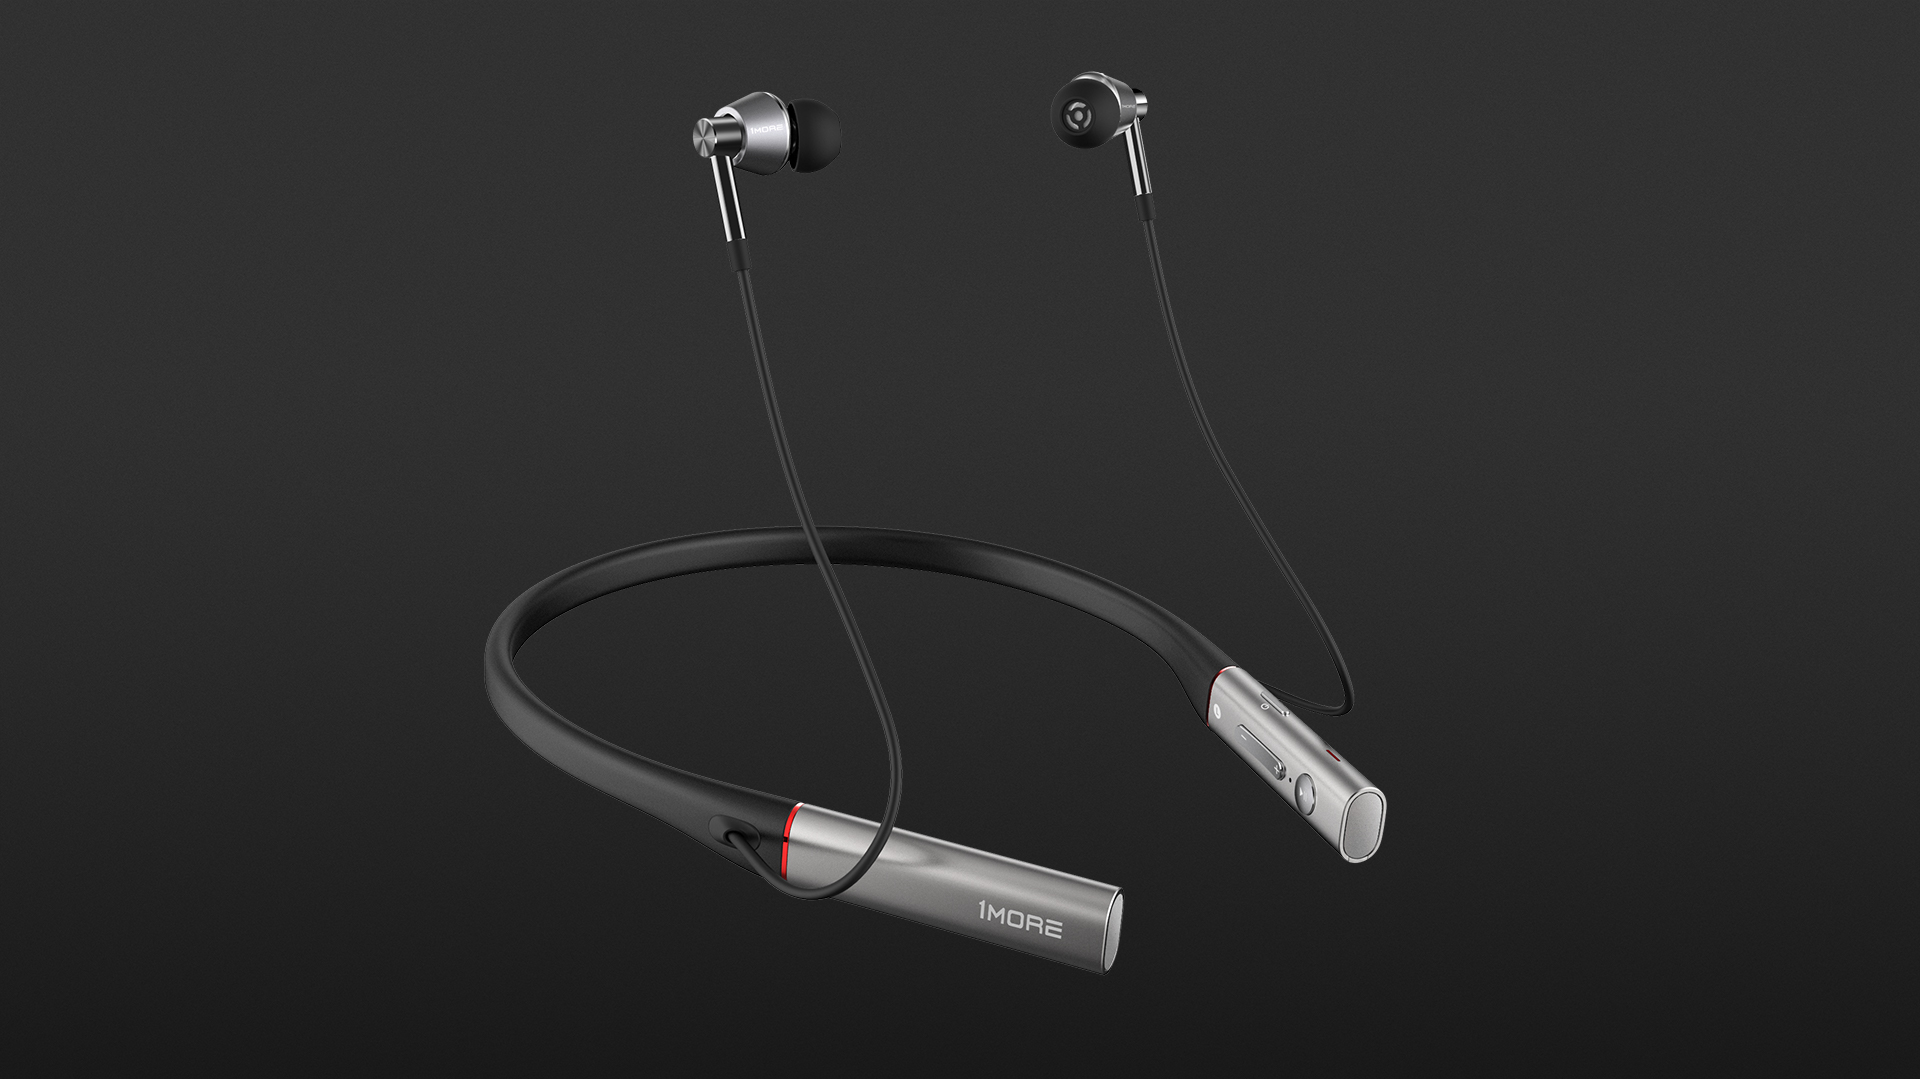 1MORE triple driver BT in ear headphones bluetooth earphones wireless sound quality with microphone E1001BT %20(6)